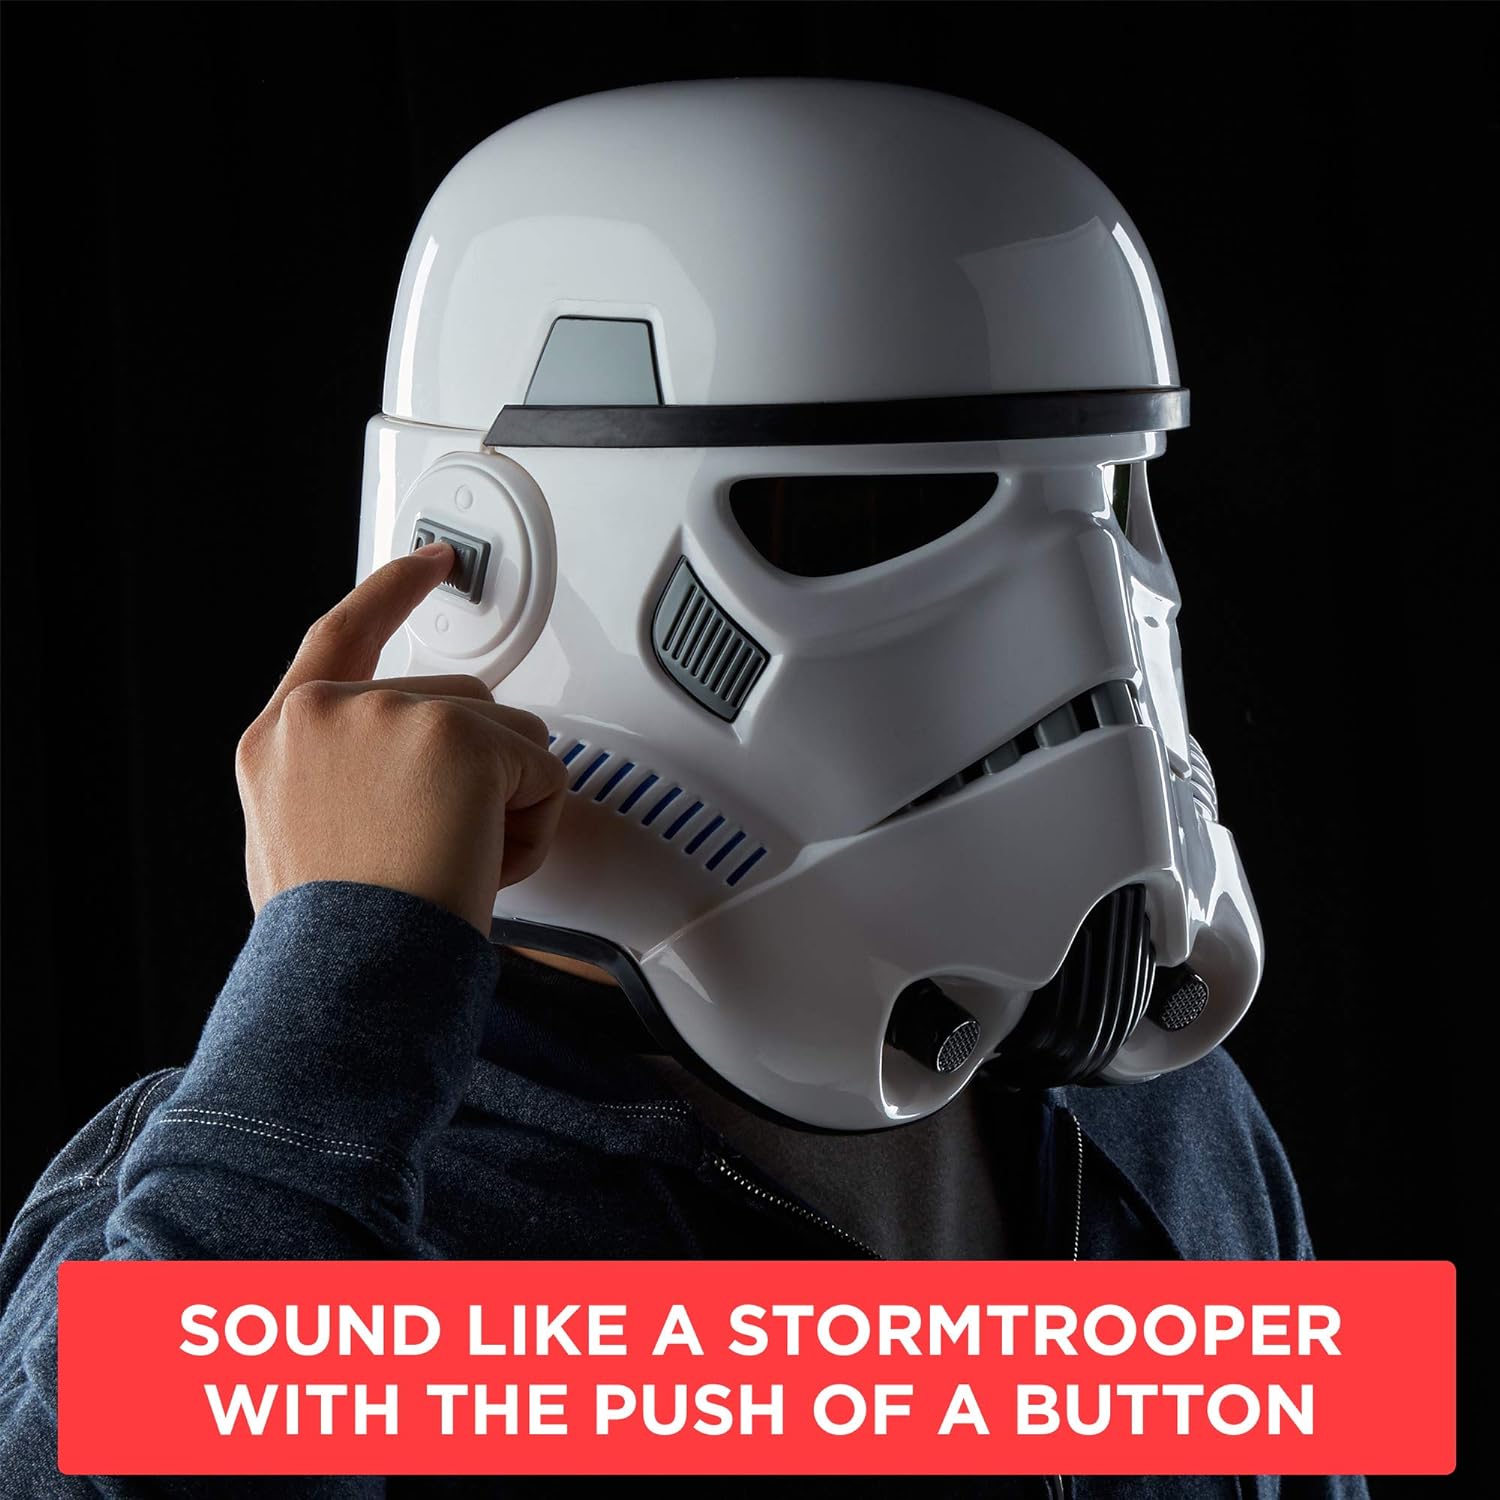 Star Wars: The Black Series - Imperial Stormtrooper Electronic Voice Changer Helmet